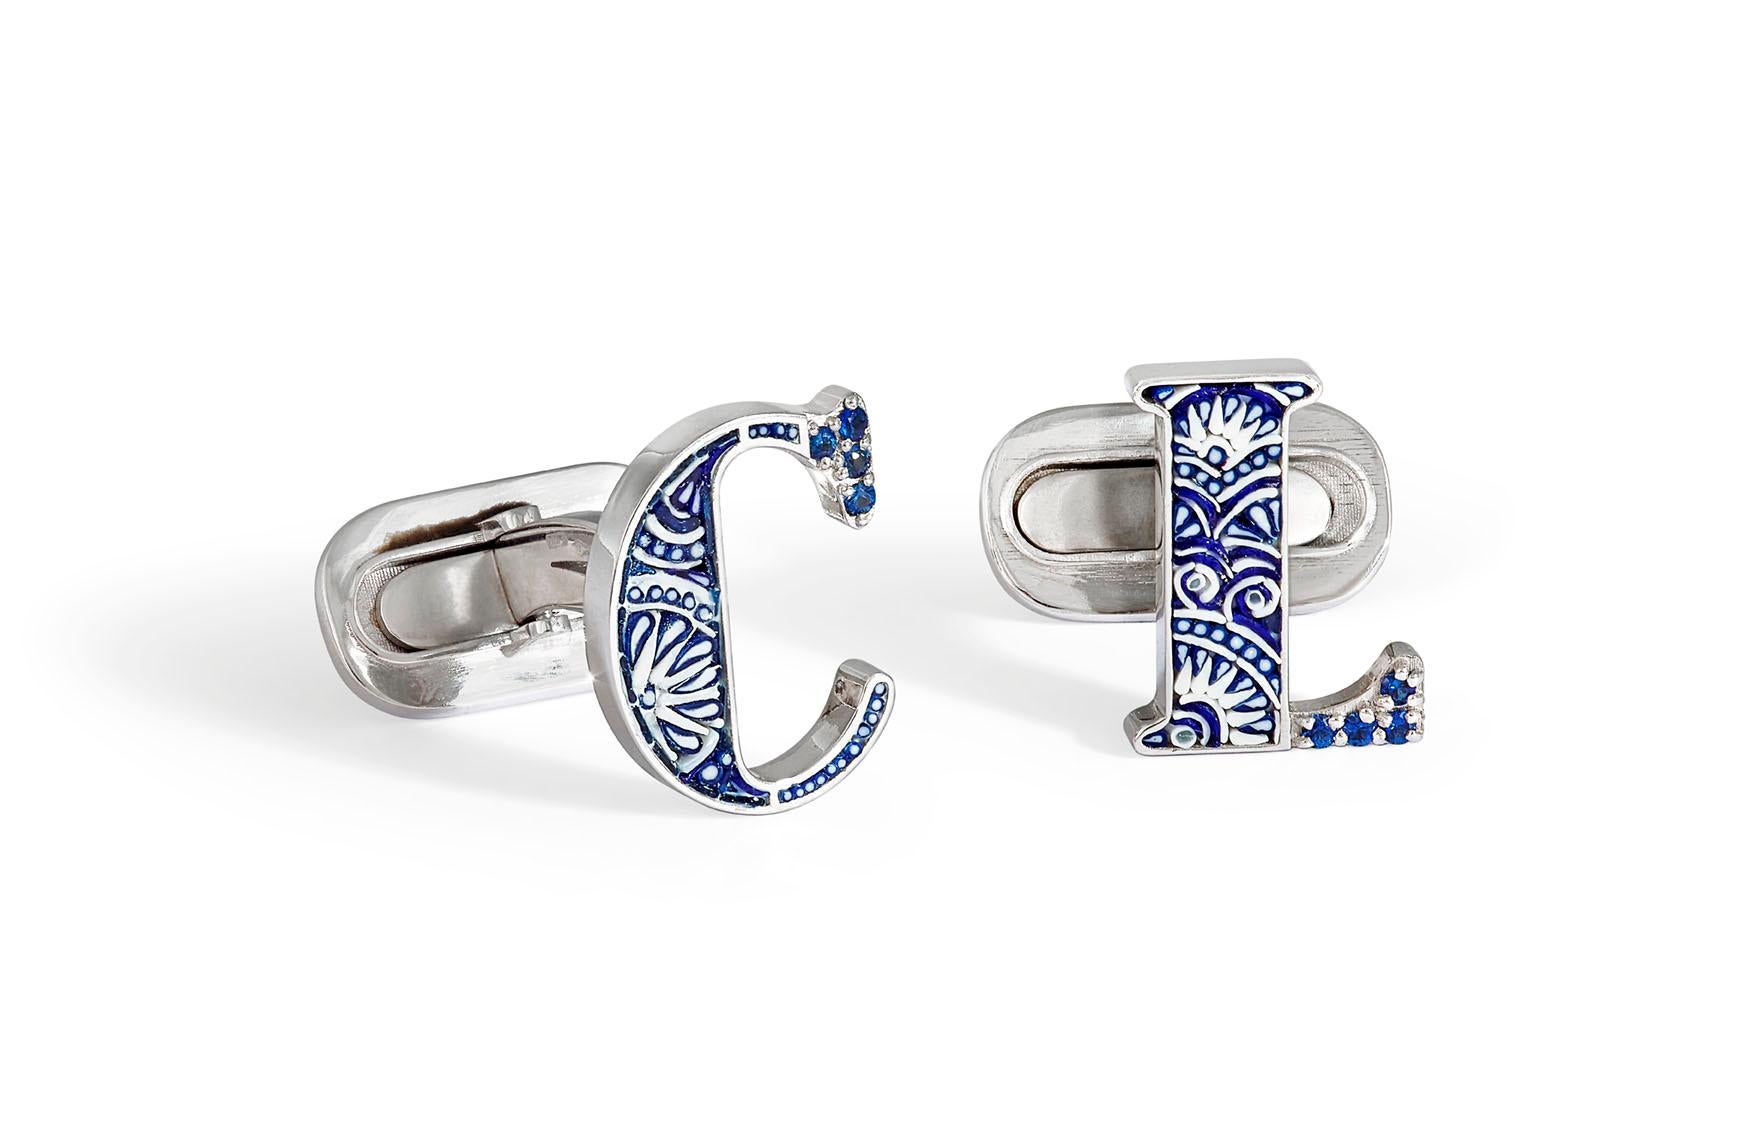 You can customize you Cufflinks with the initial of your name using Gold , precious stone like Diamond, Ruby, Sapphire etc hand decorated with customizable MicroMosaic 

The price showed is for the letters L and P in Gold 18k and Diamond